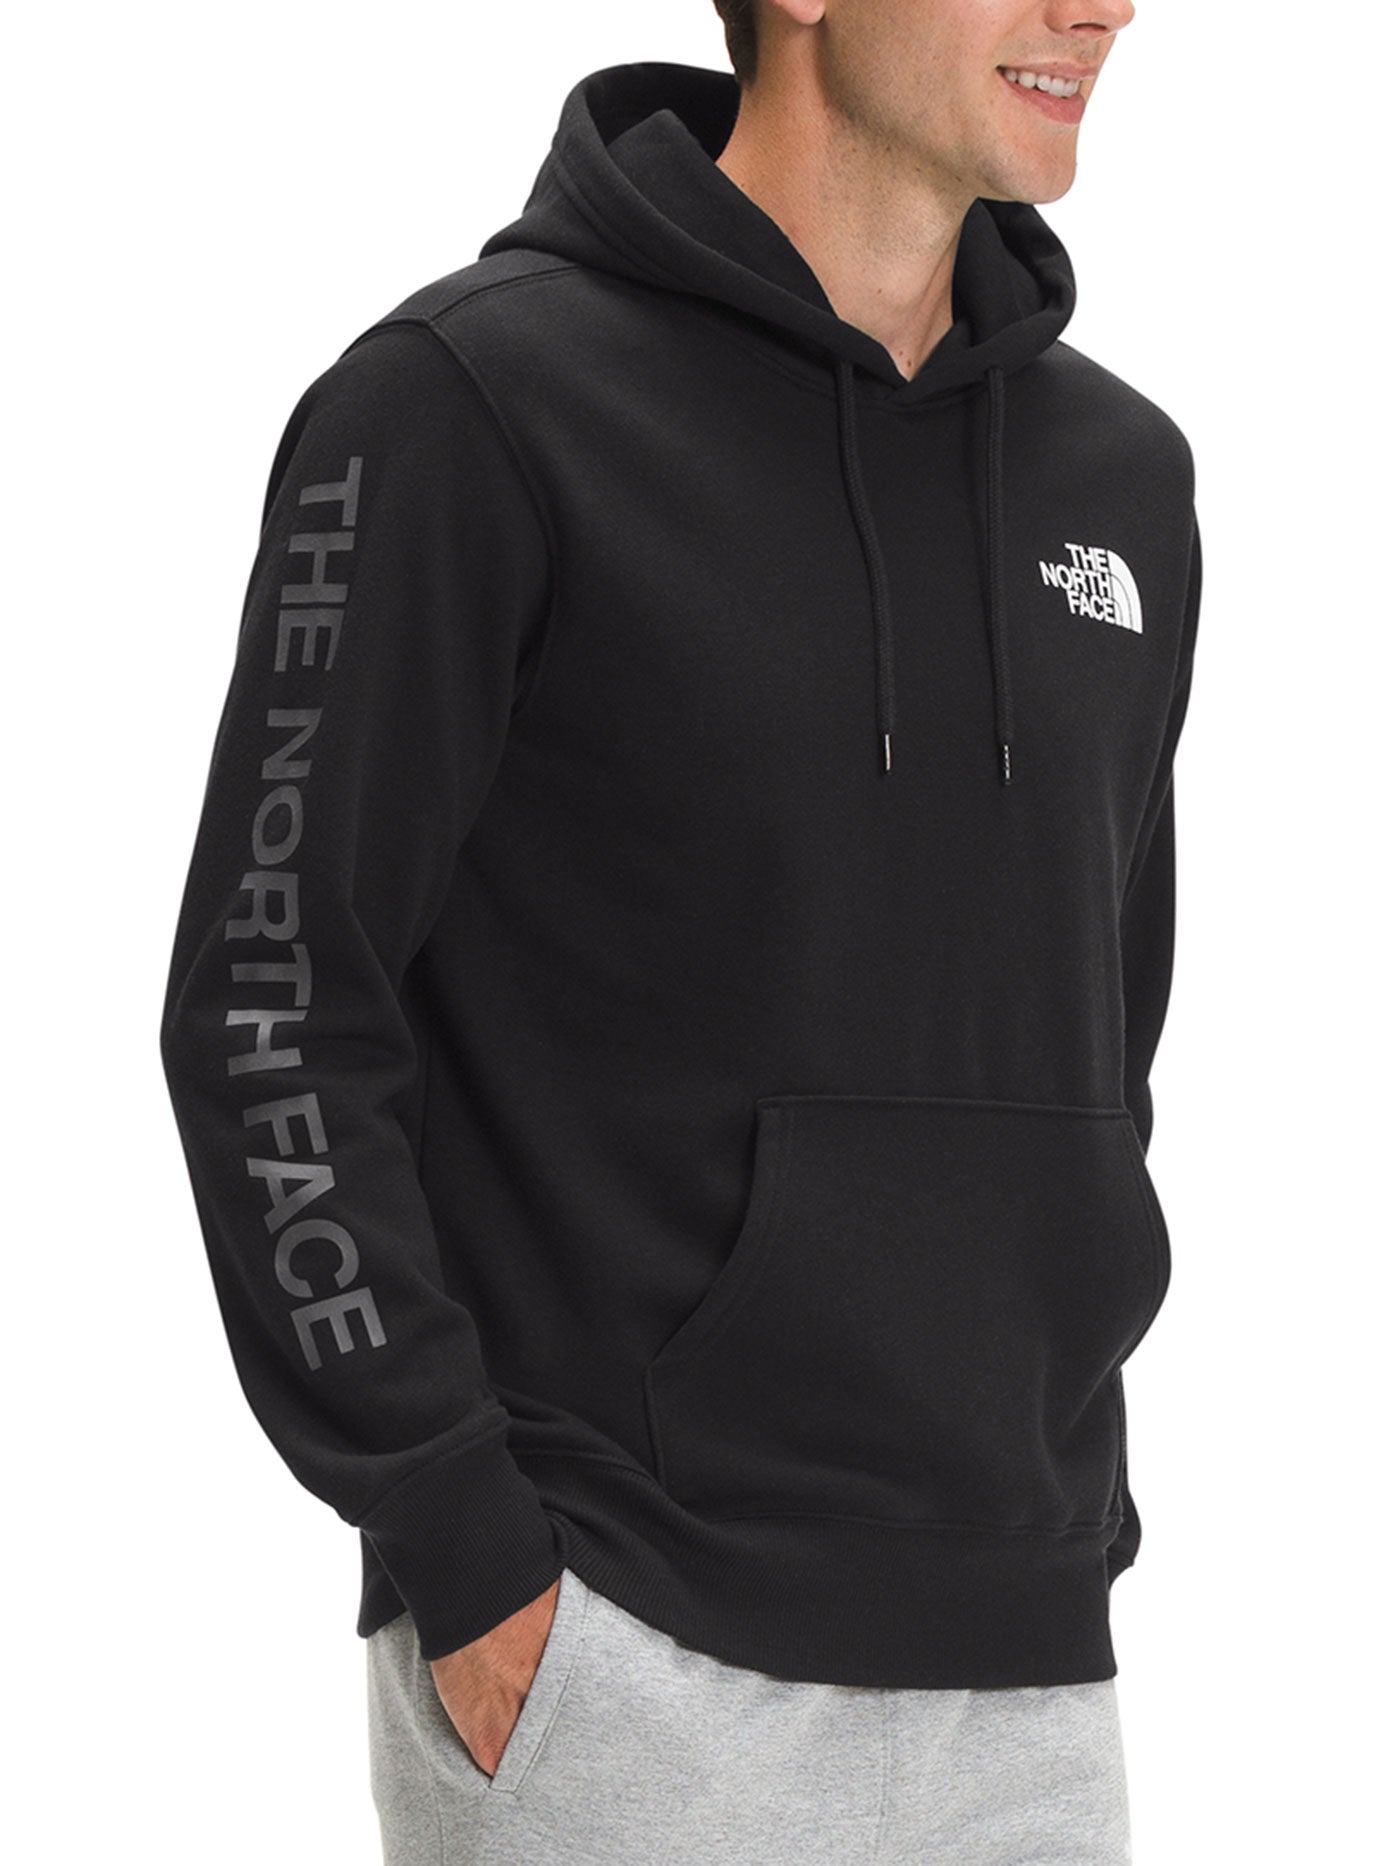 The North Face Sleeve Hit Hoodie